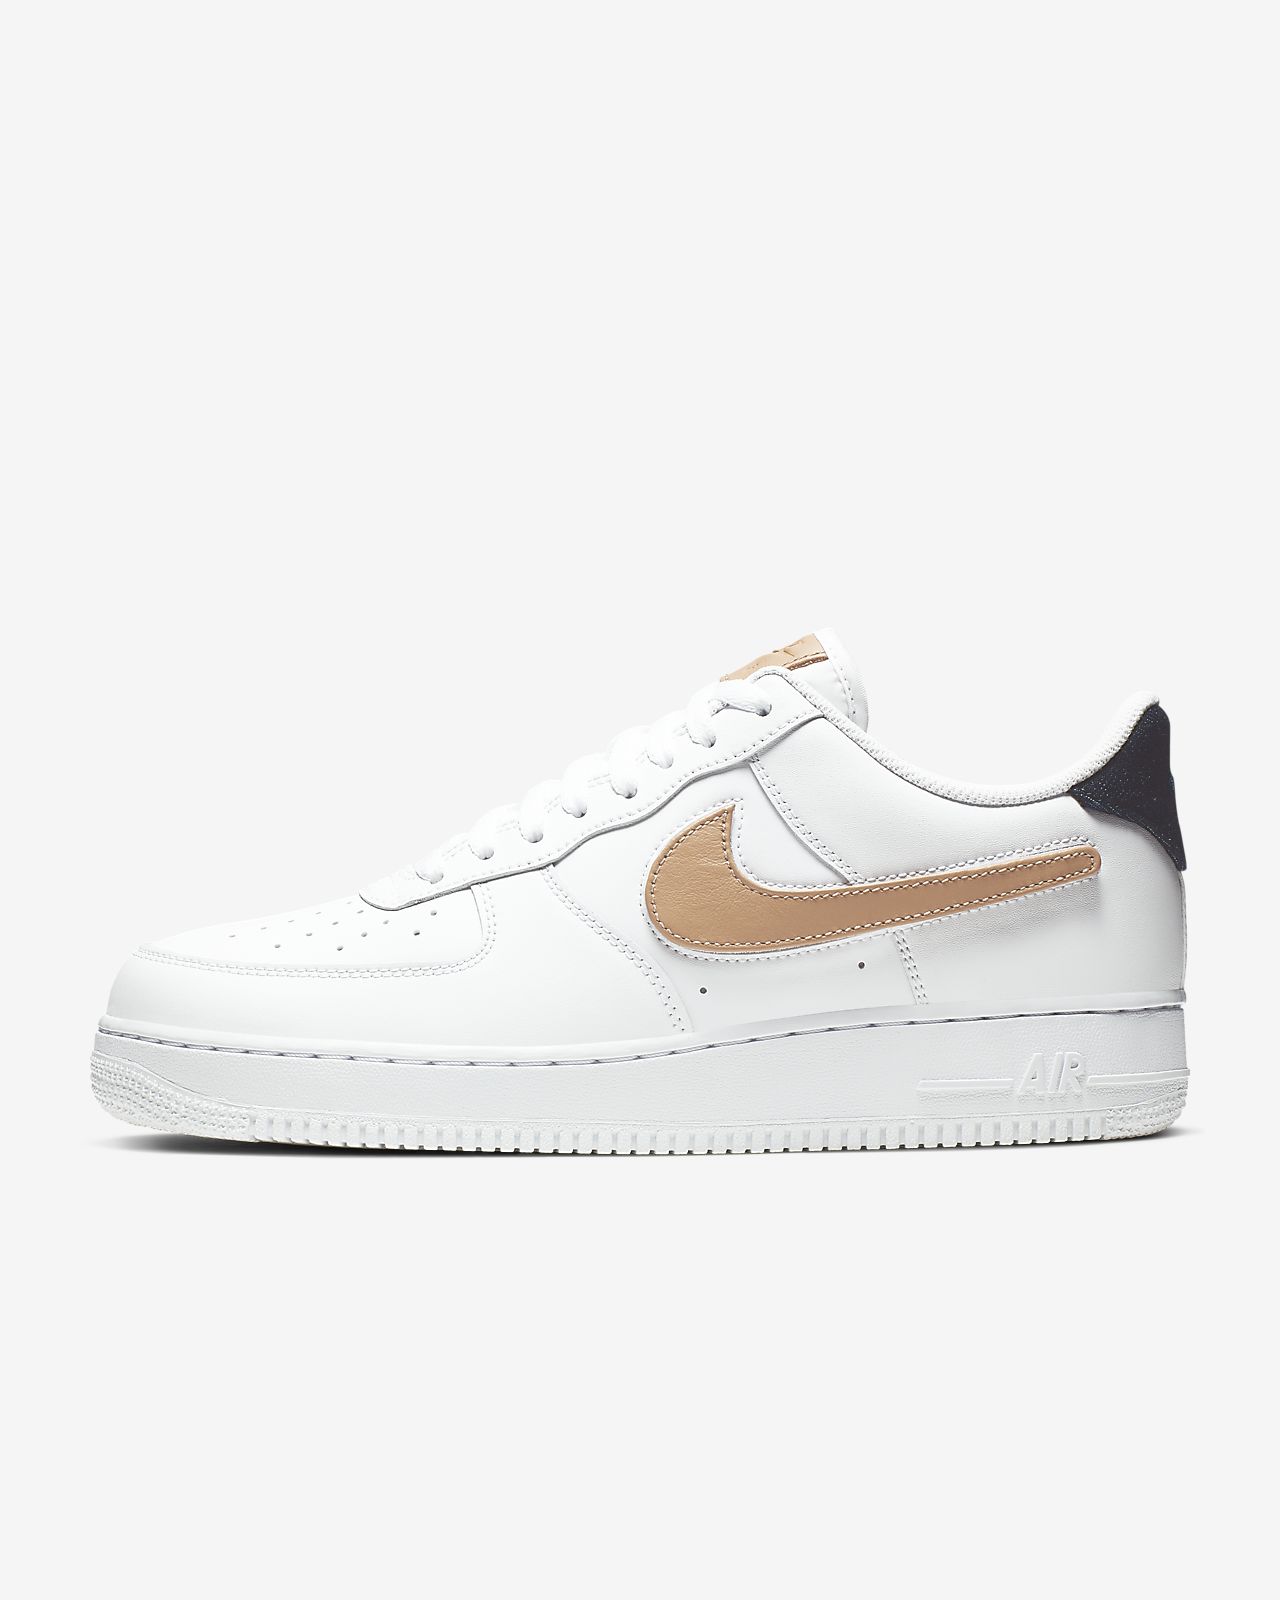 air force ones lv8 3